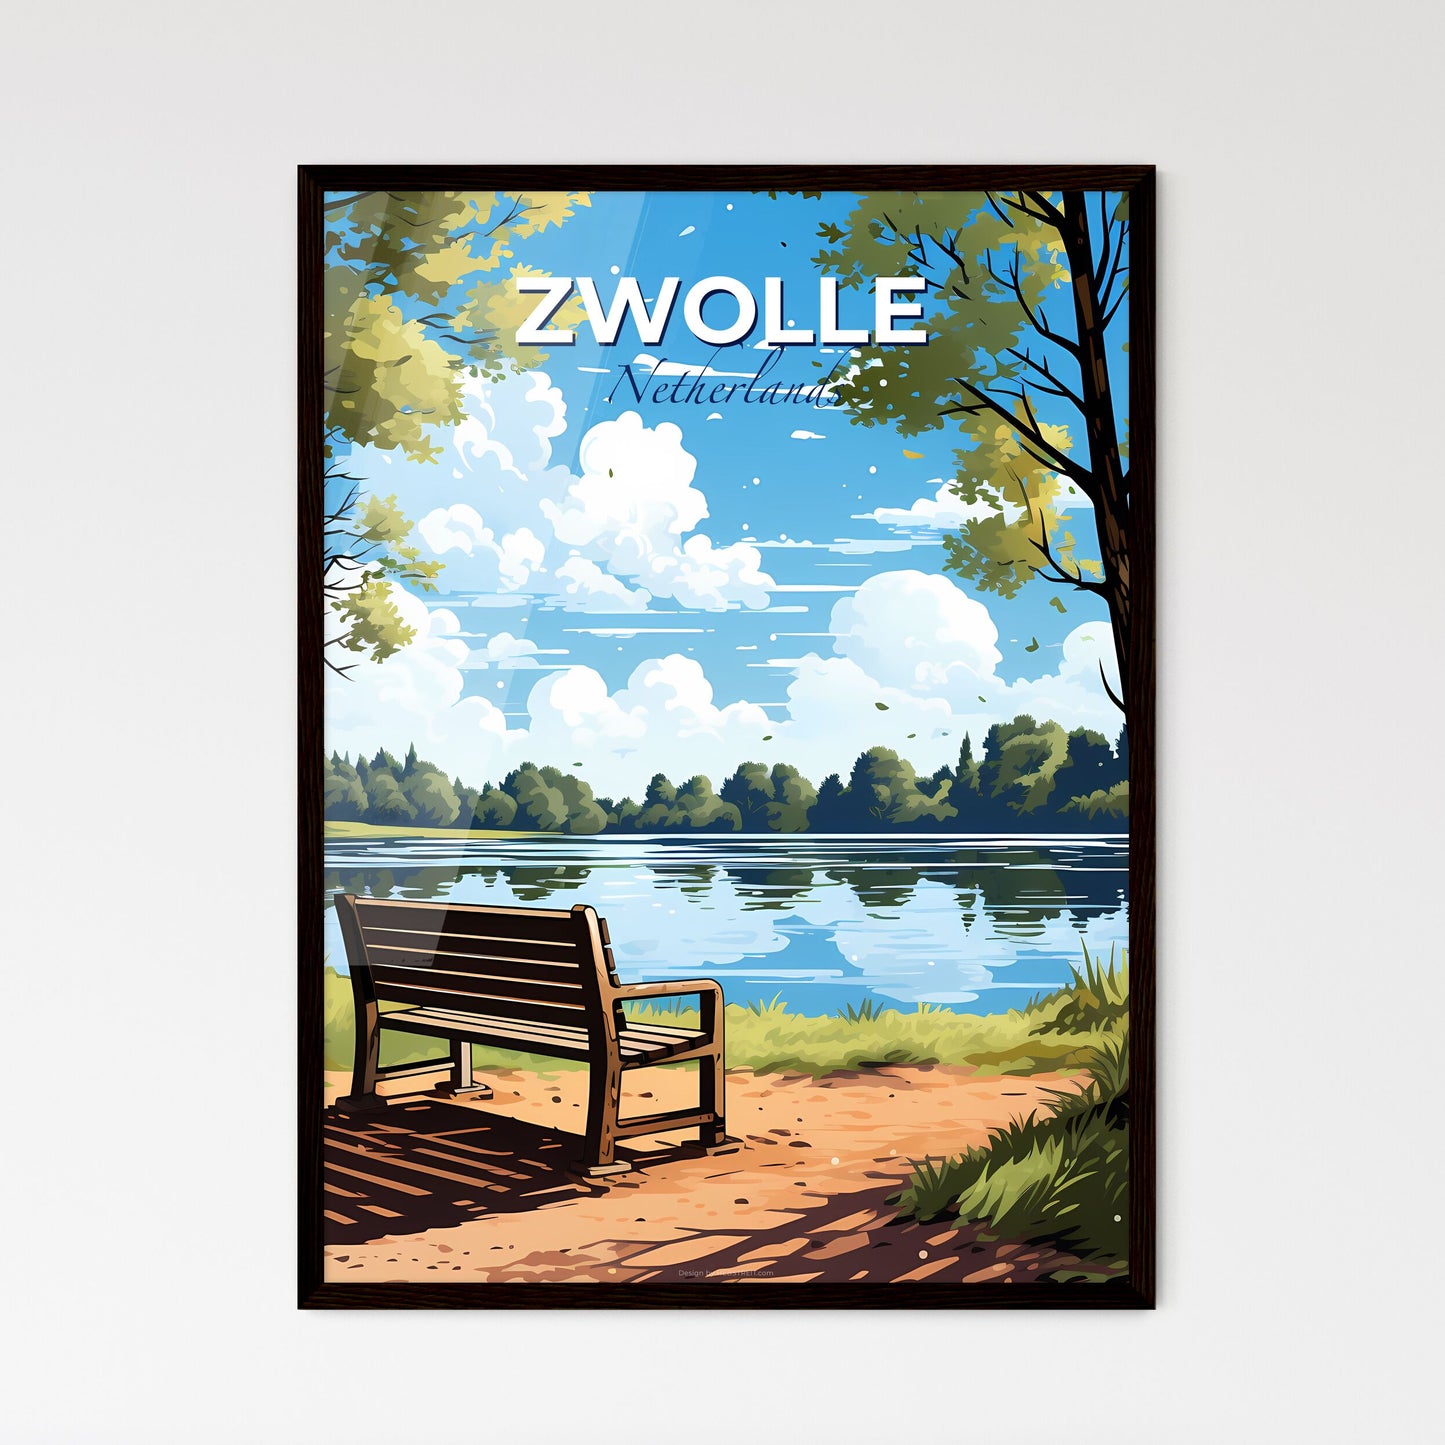 Zwolle, Netherlands, A Poster of a bench overlooking a lake Default Title